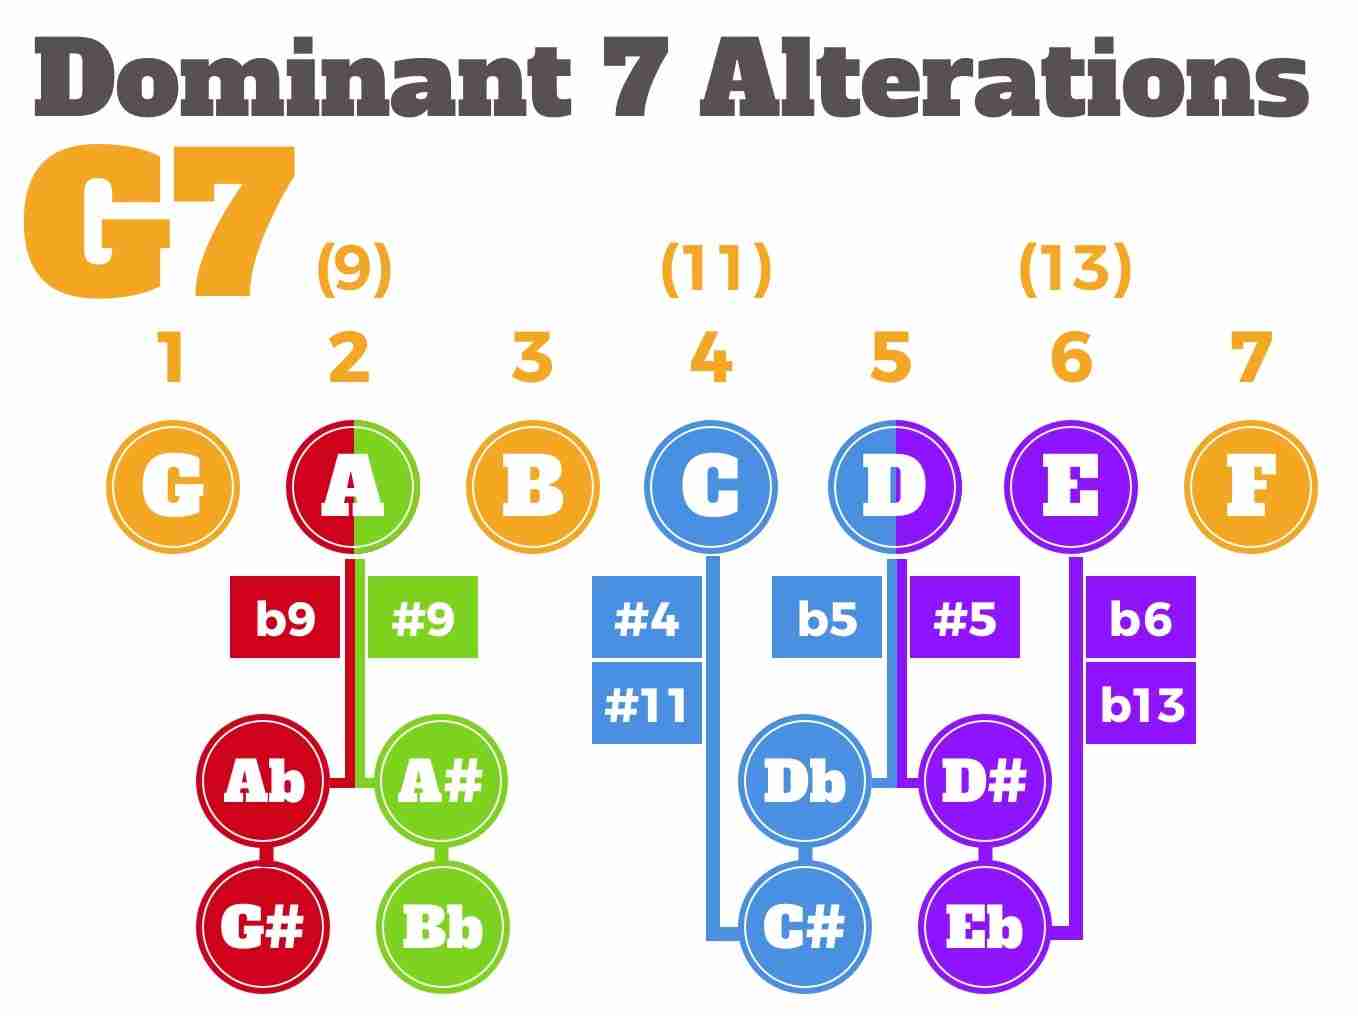 Dominant 7 alterations guide